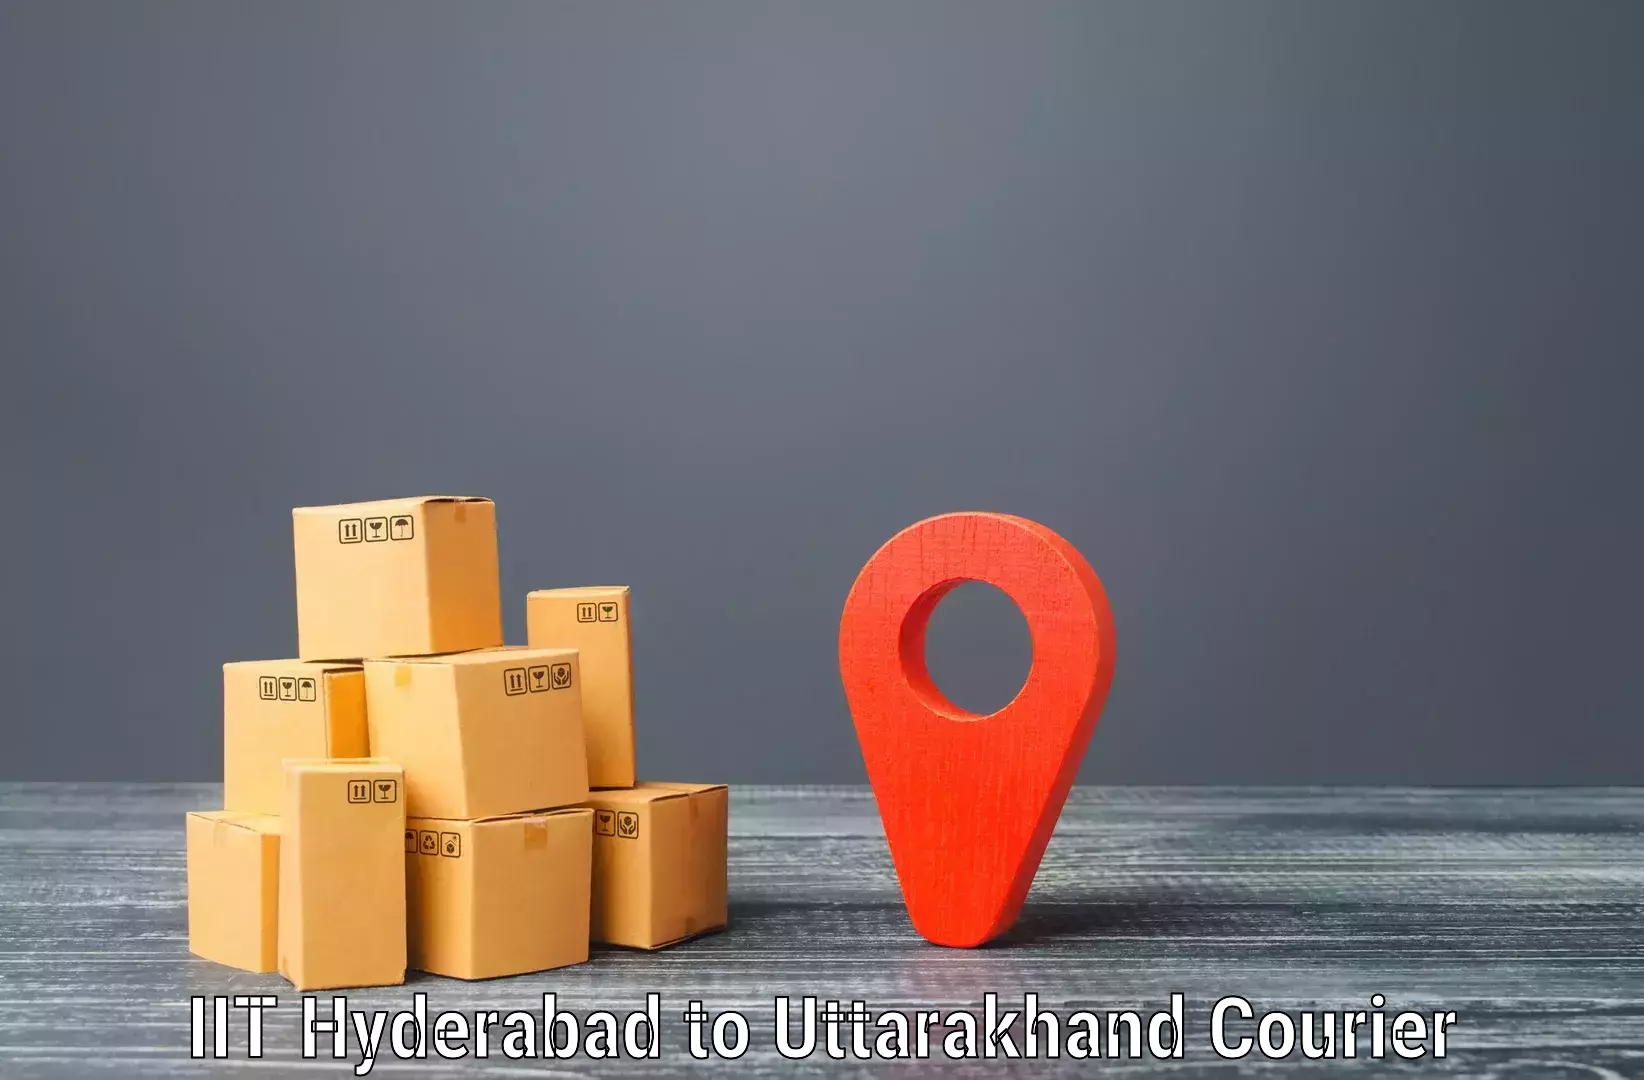 Delivery service partnership IIT Hyderabad to Someshwar